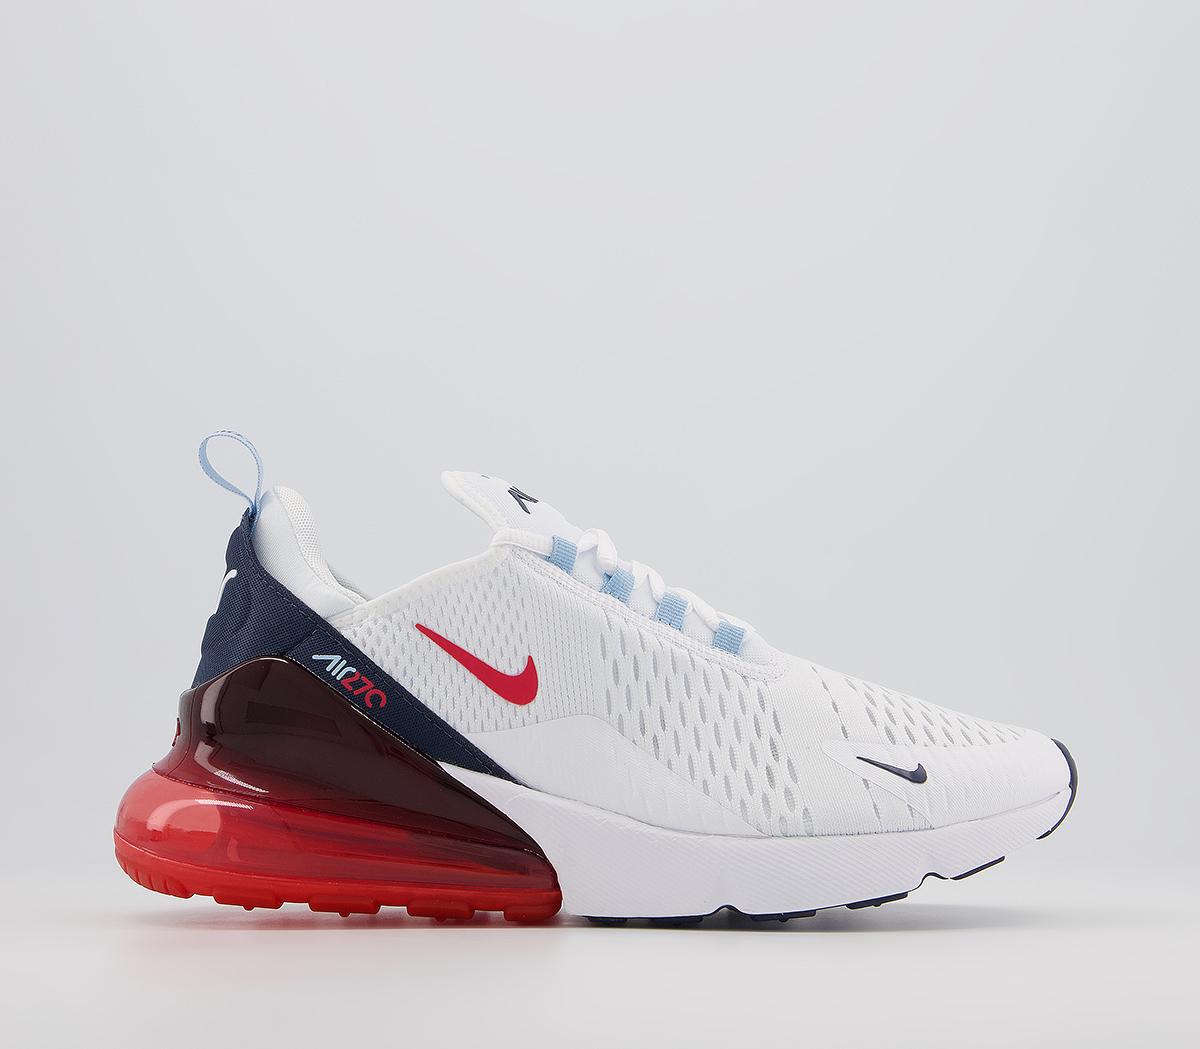 Nike Air Max 270 Trainers White Chilie Red Midnight Navy - Nike Air Max